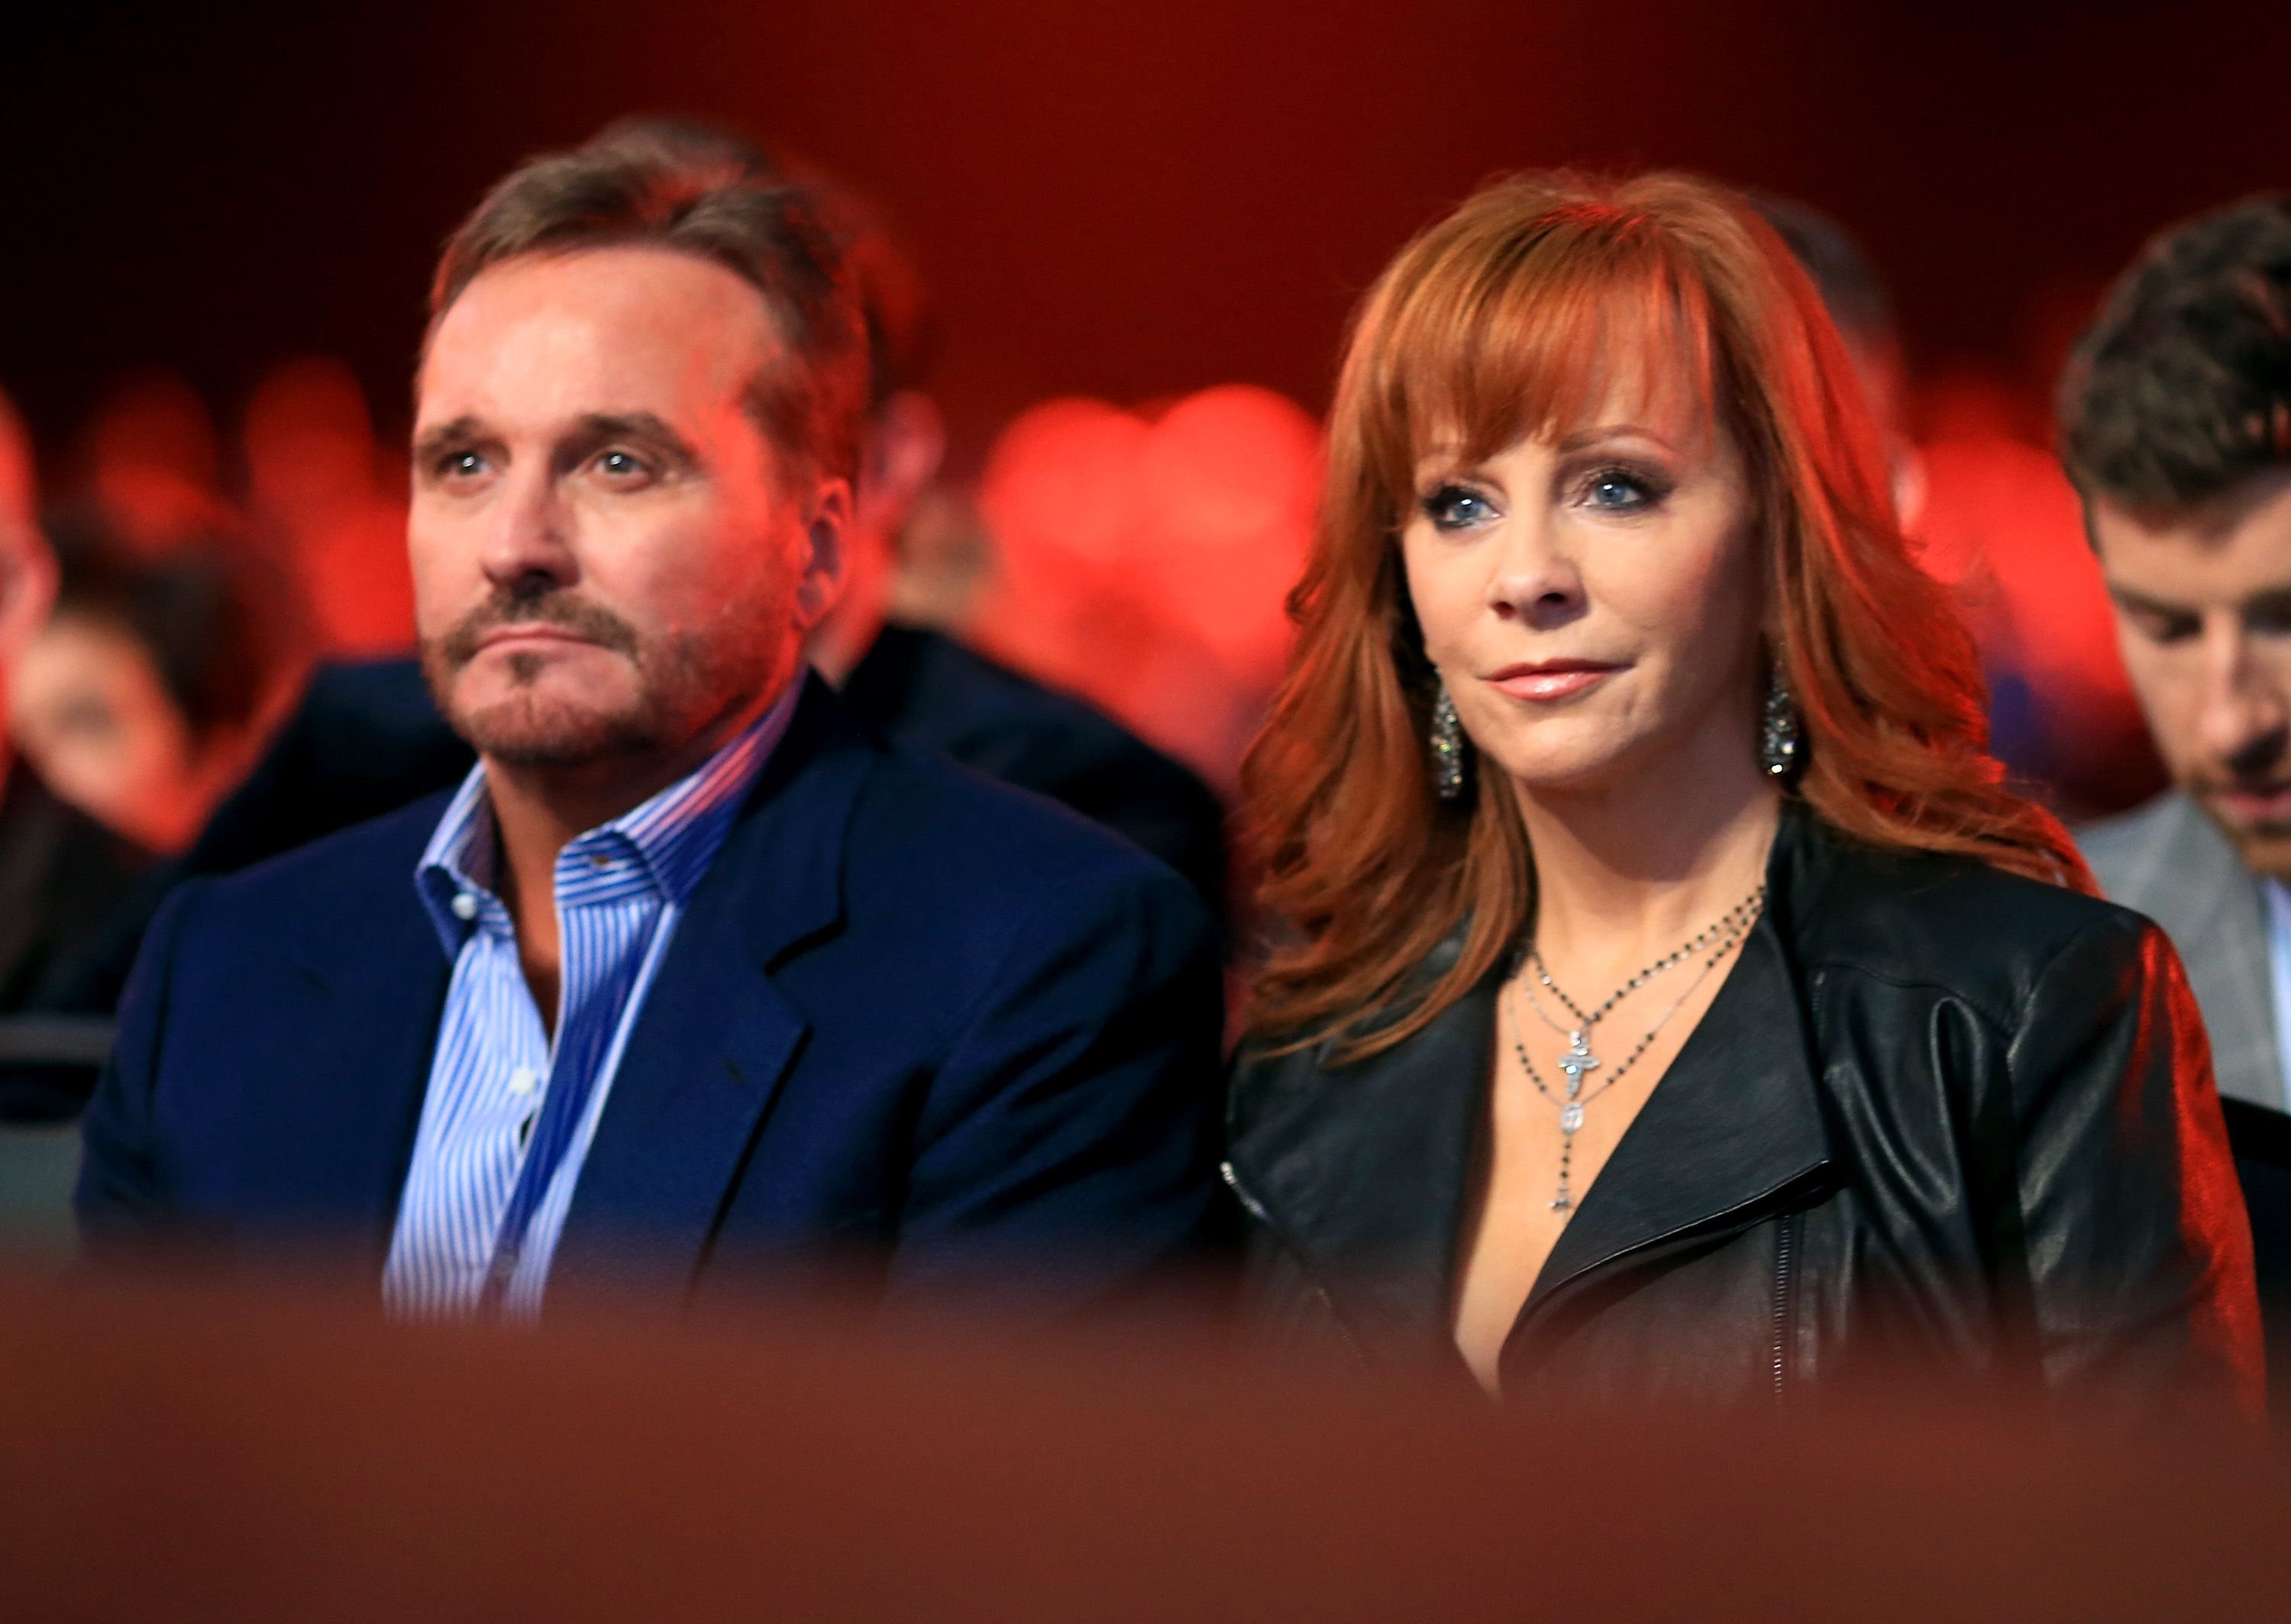 Narvel Blackstock and Reba McEntire at the 2014 American Country Countdown Awards | Source: Getty Images